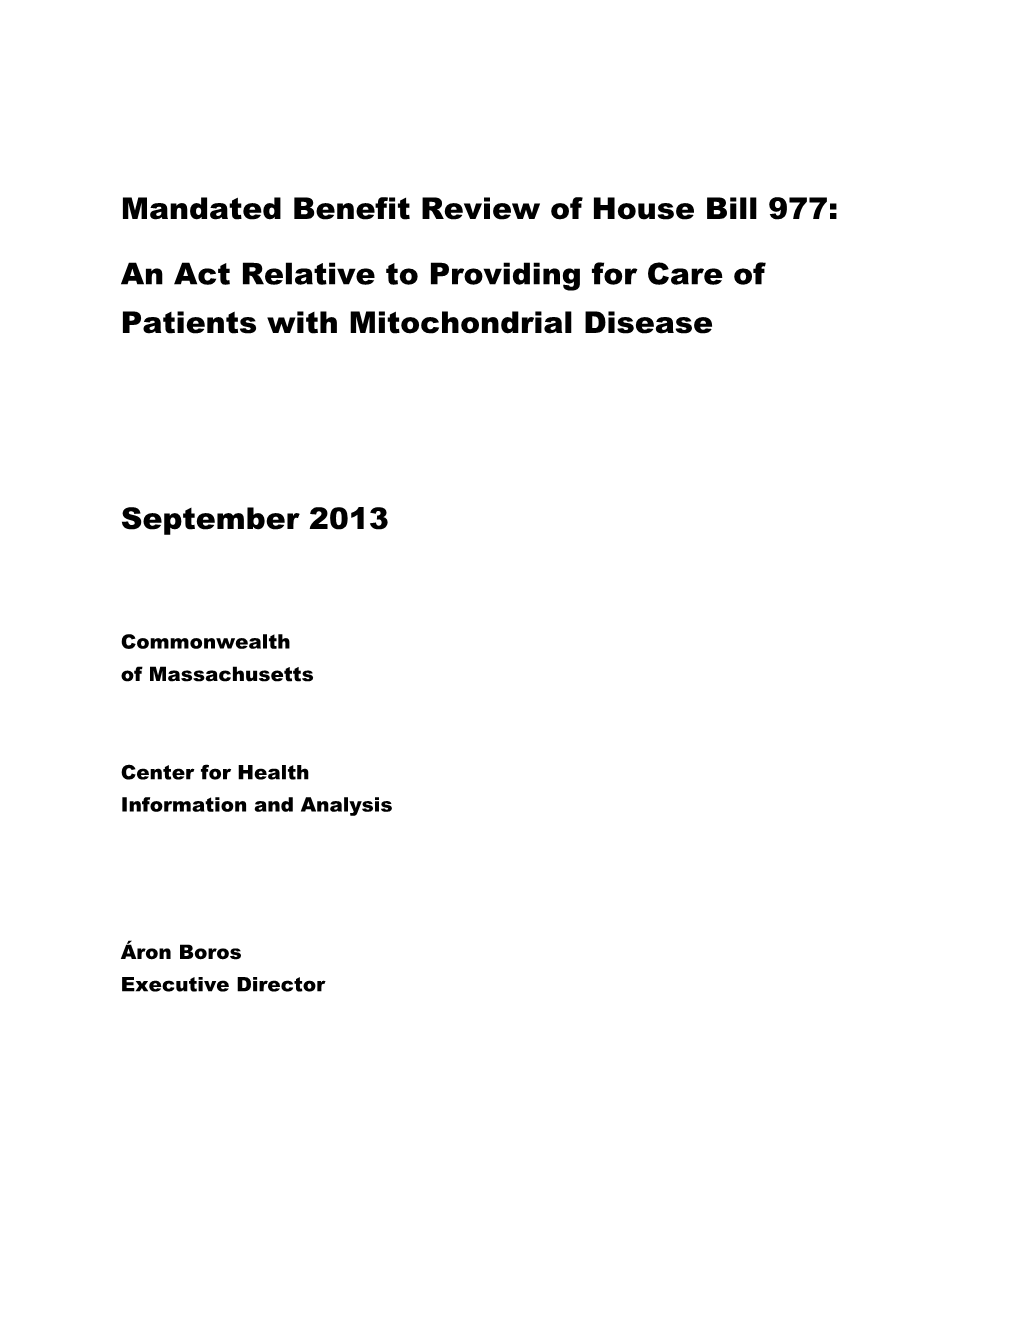 Mandated Benefit Review of House Bill 977: an Act Relative to Providing for Care of Patients